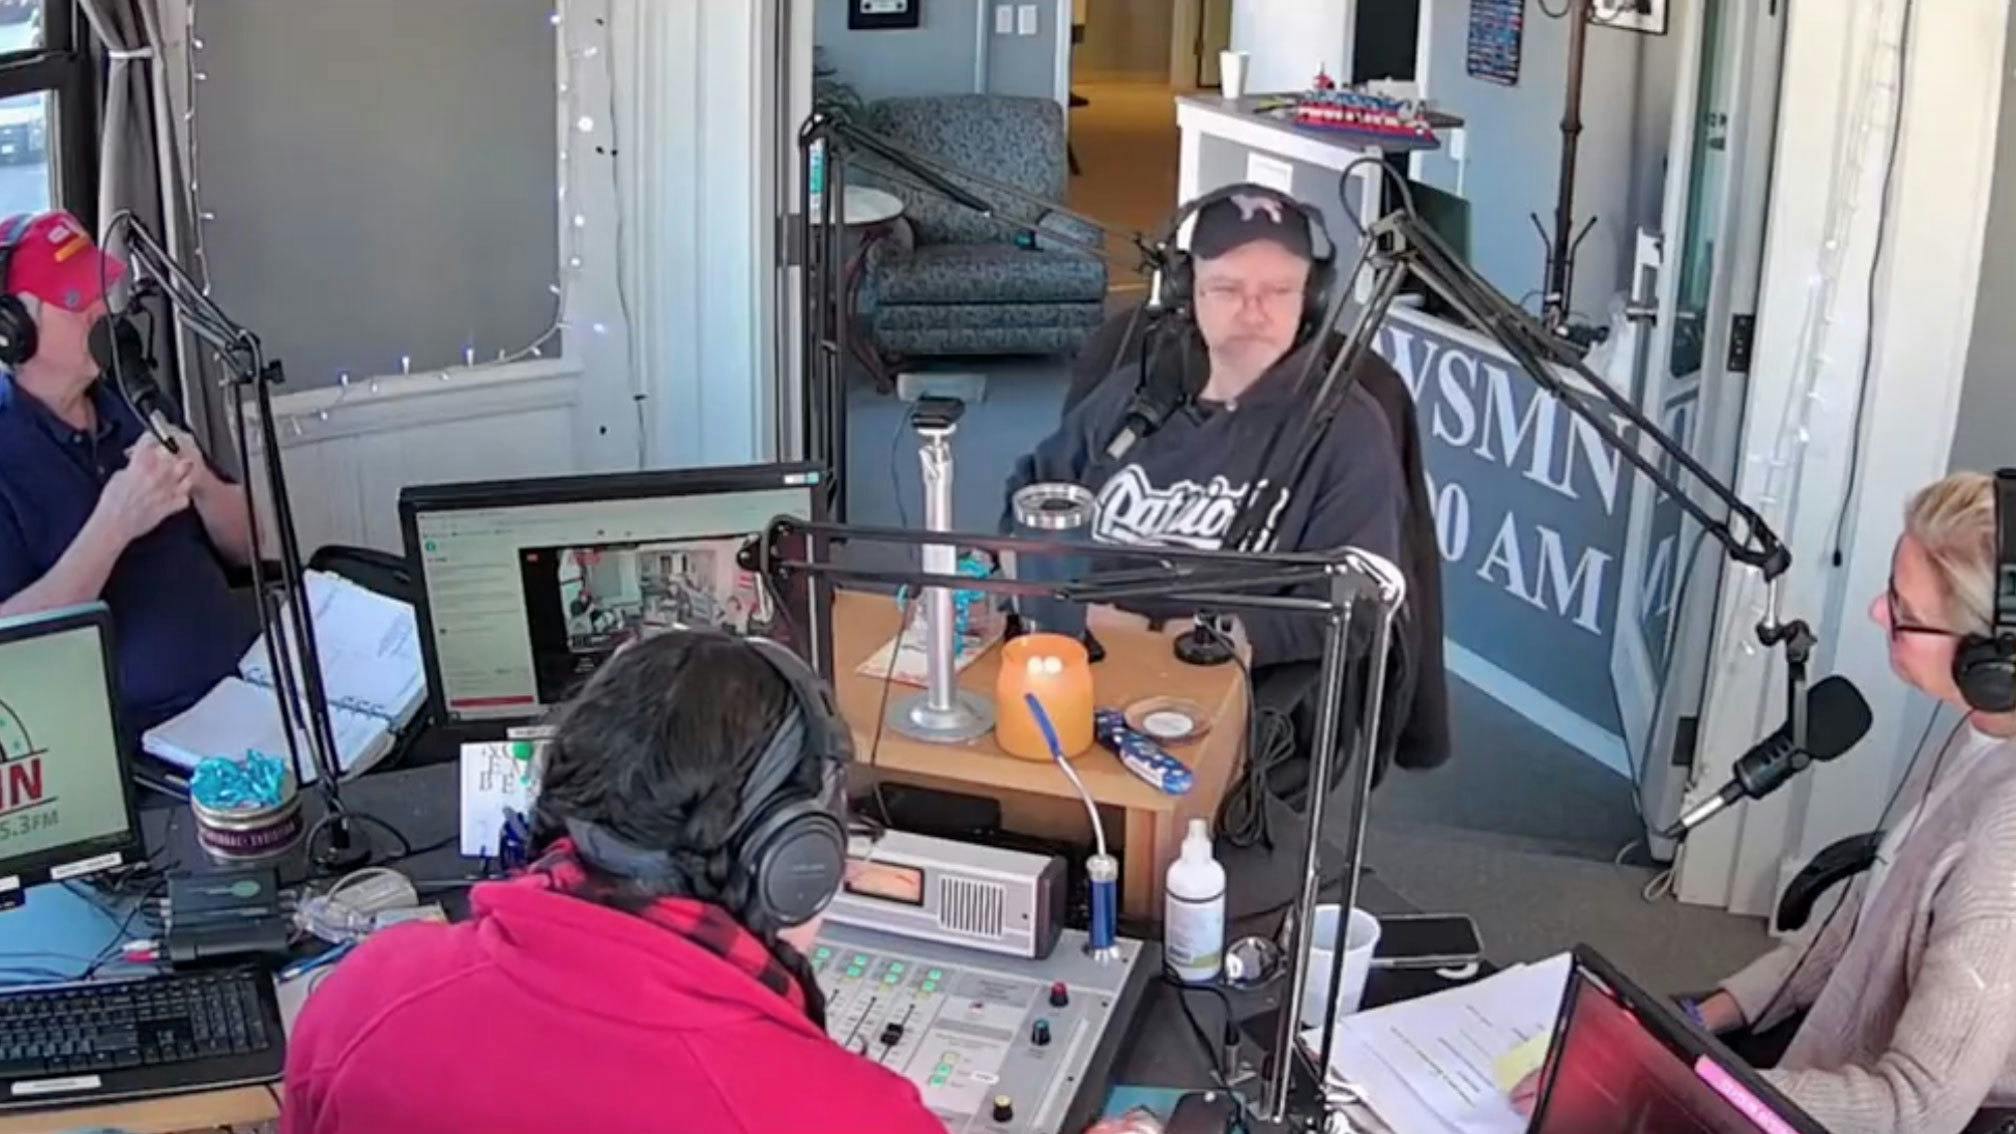 Watch: Punk fan trolls conservative radio show by namedropping loads of bands